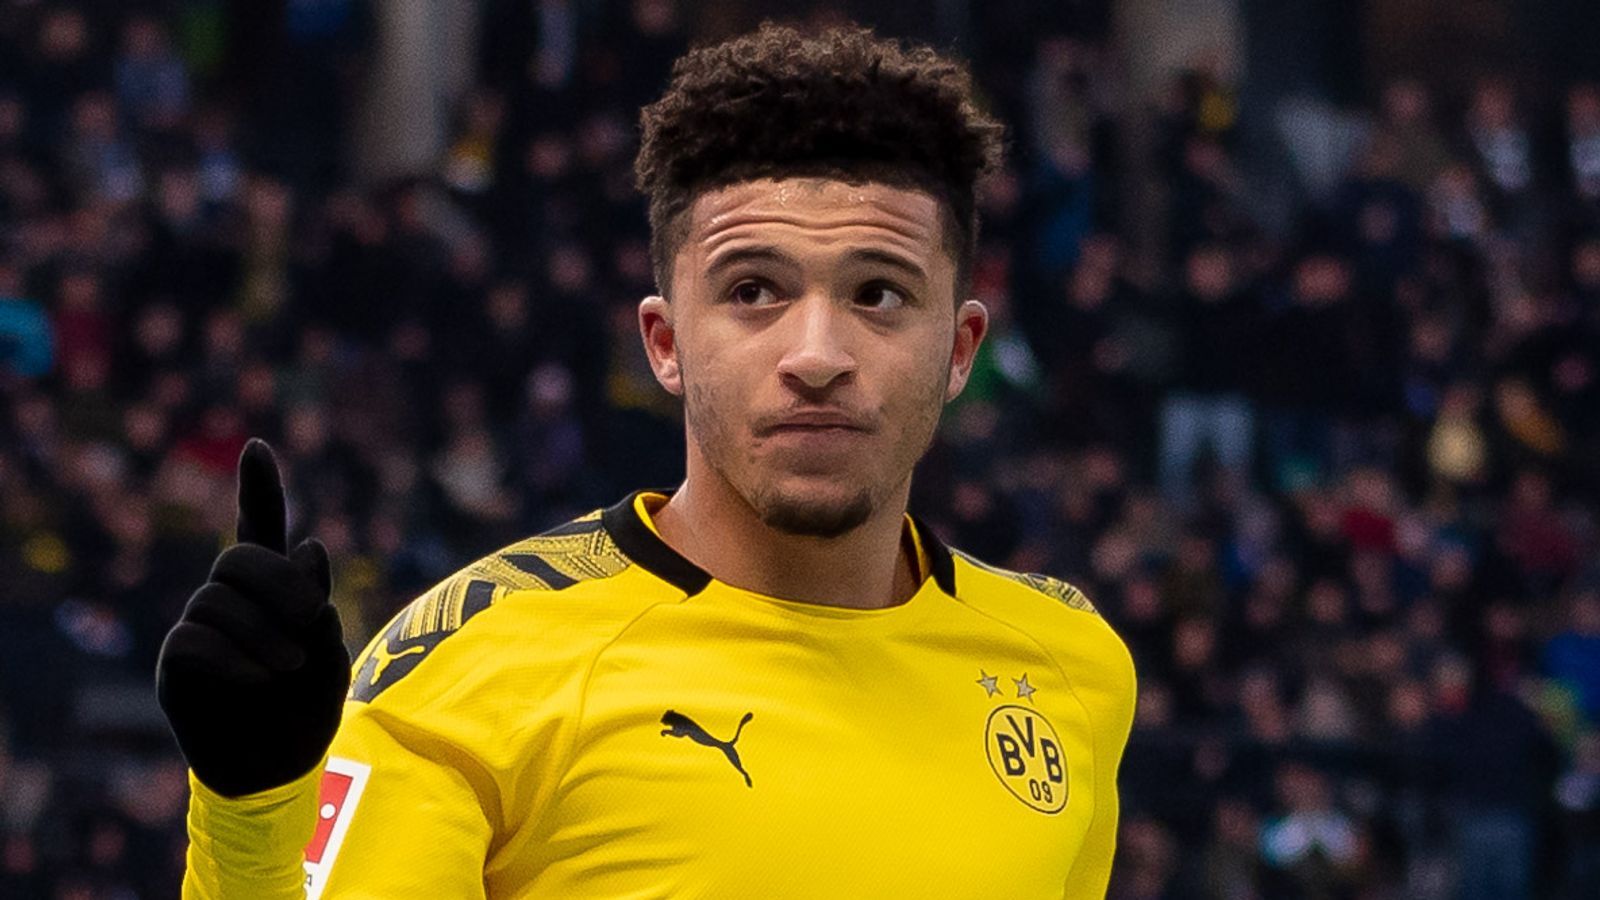 Liverpool ahead of Manchester United to sign Jadon Sancho